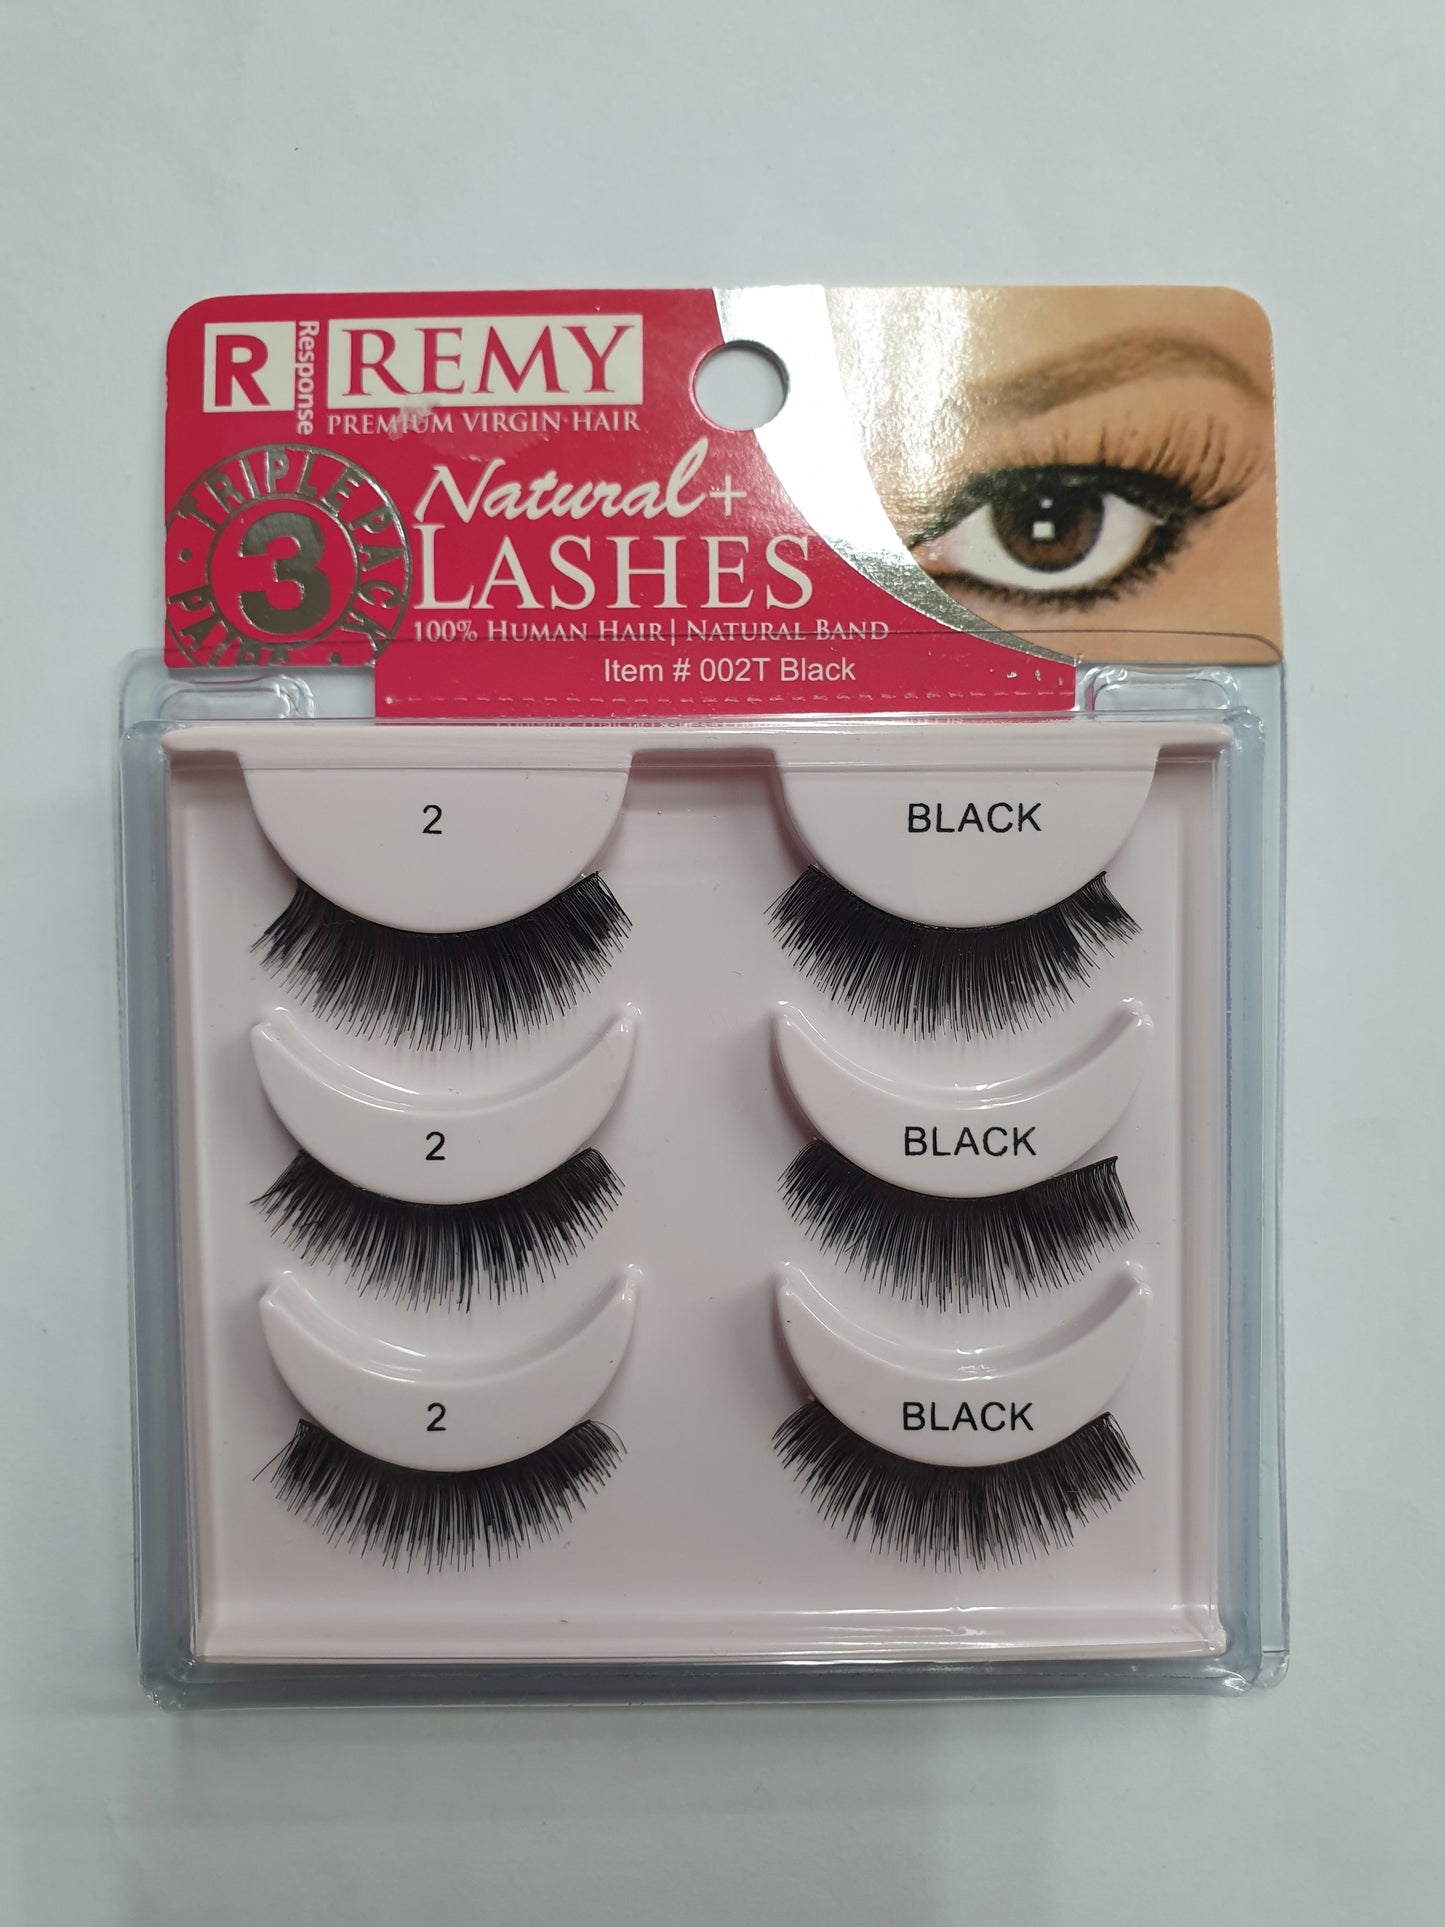 Response Remy Natural+ Lashes (3 Pack)